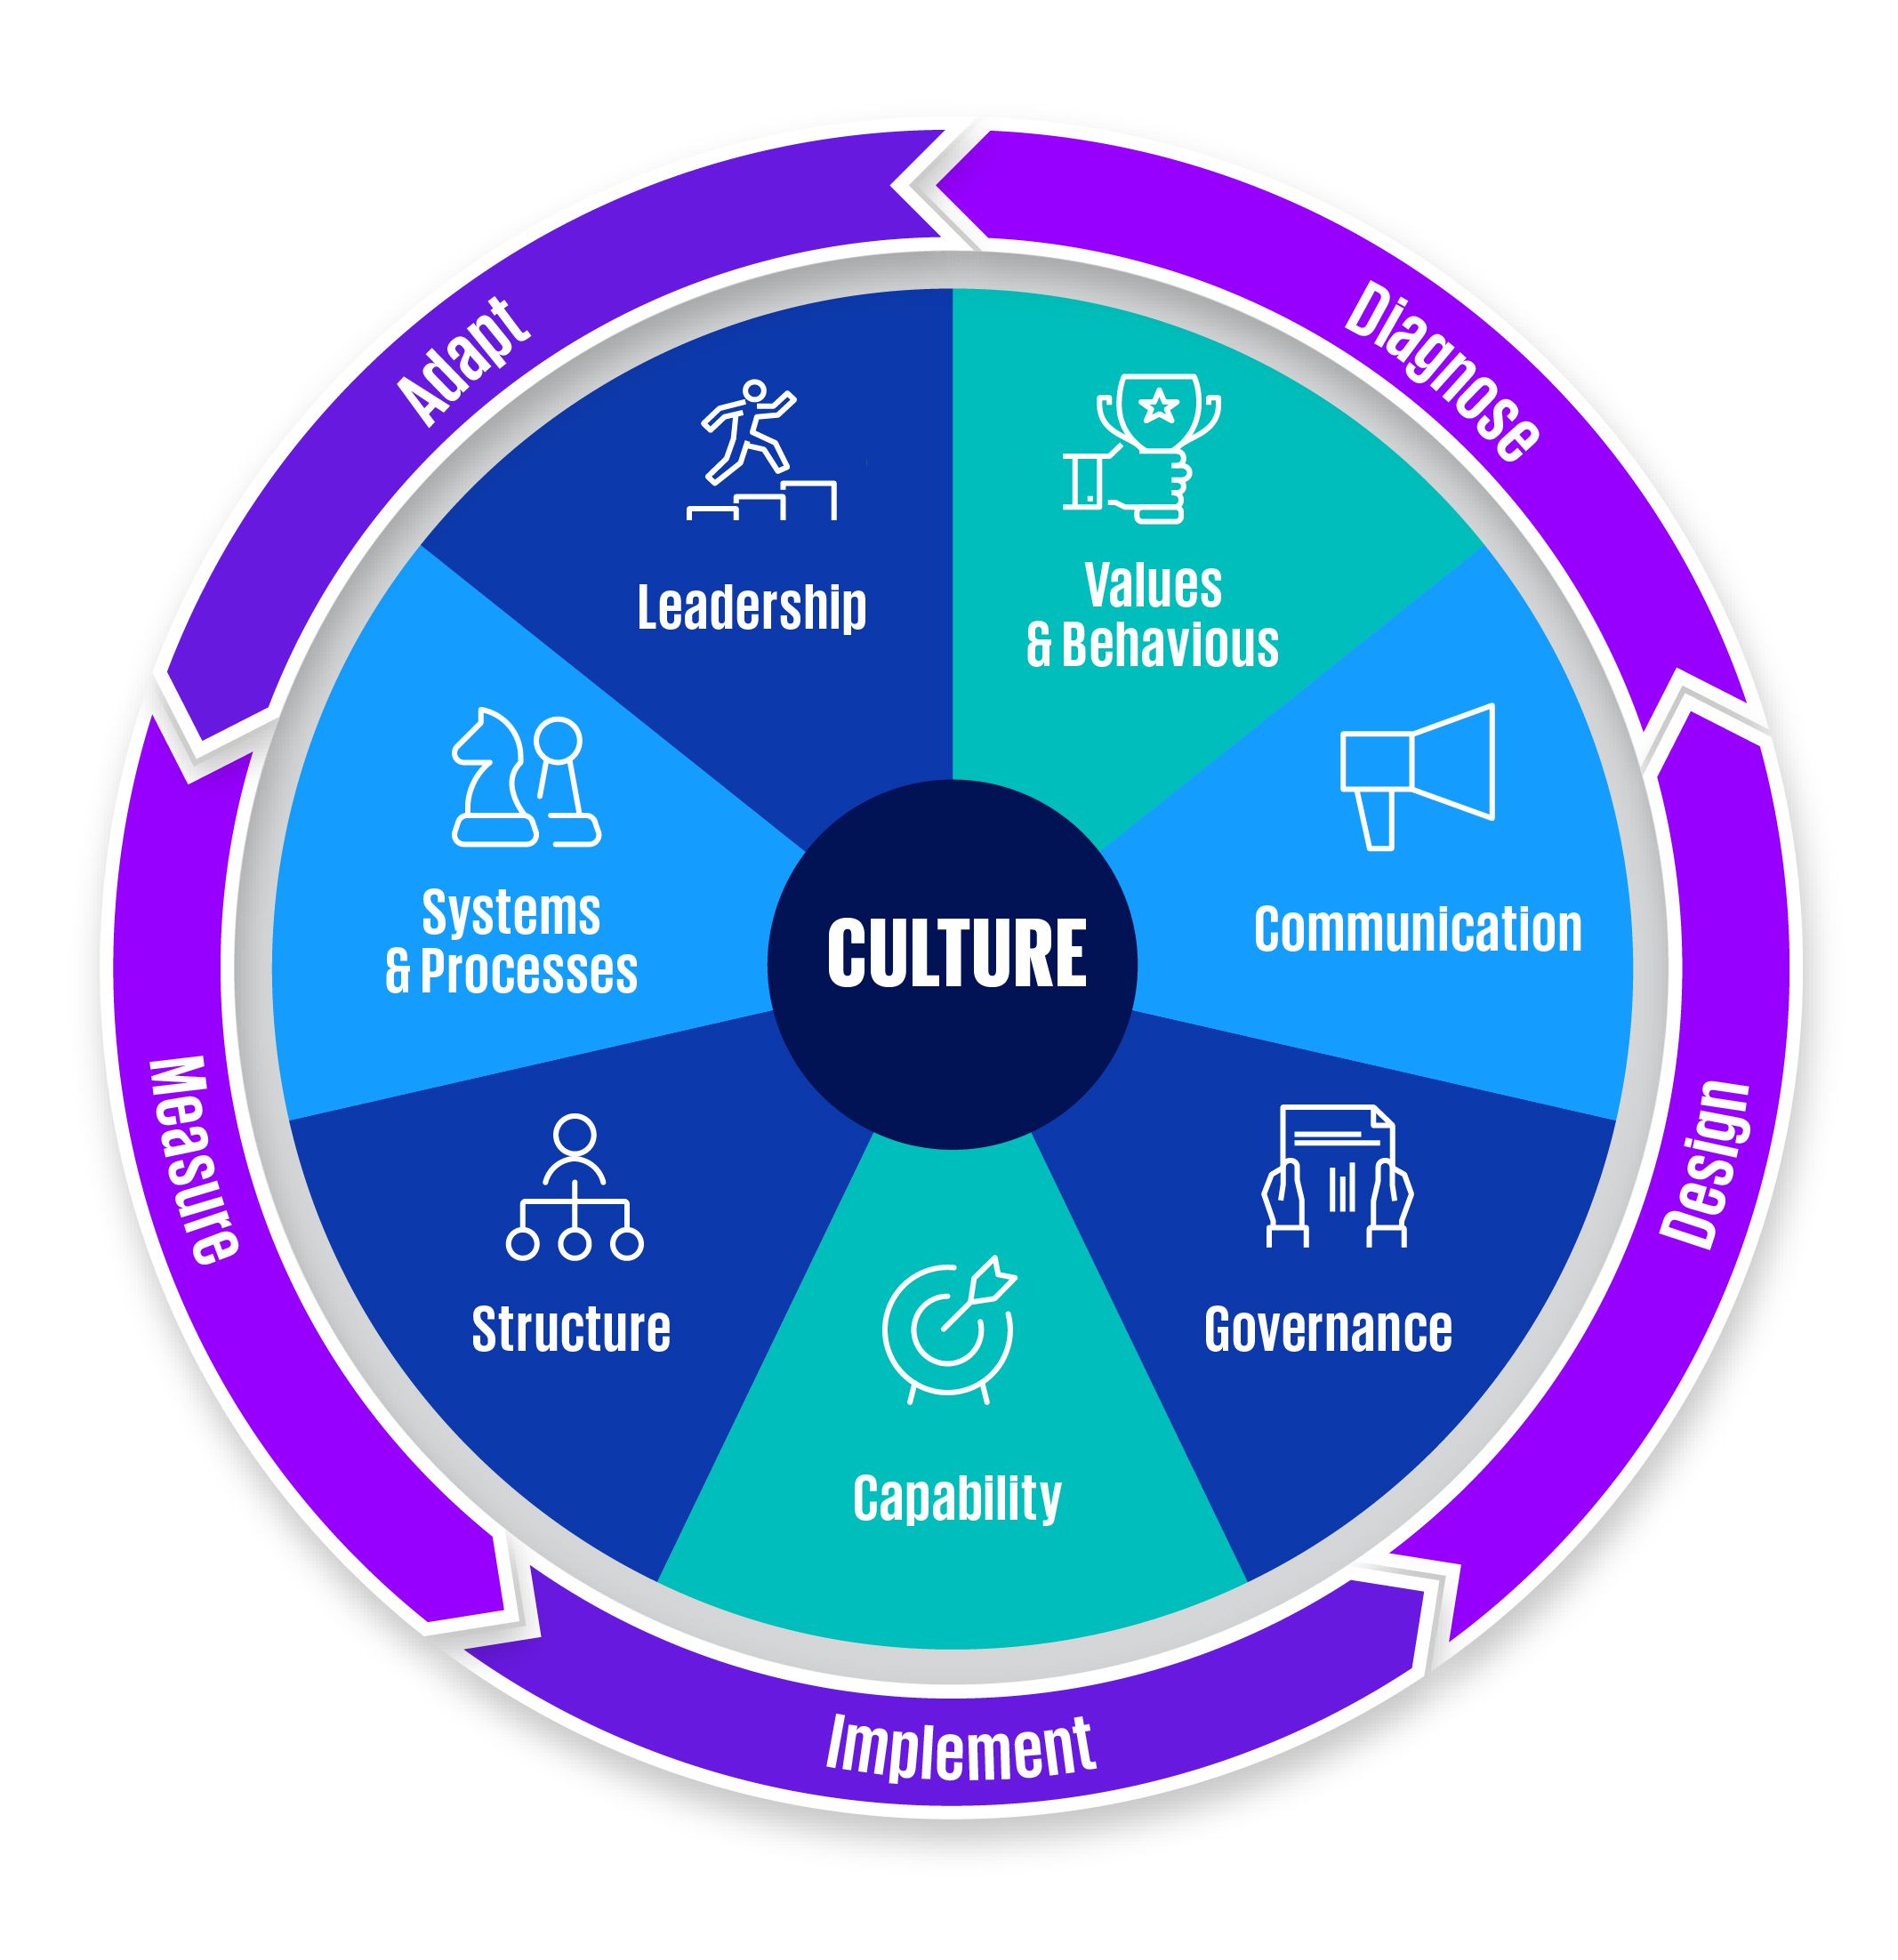 Evolve workplace cultures